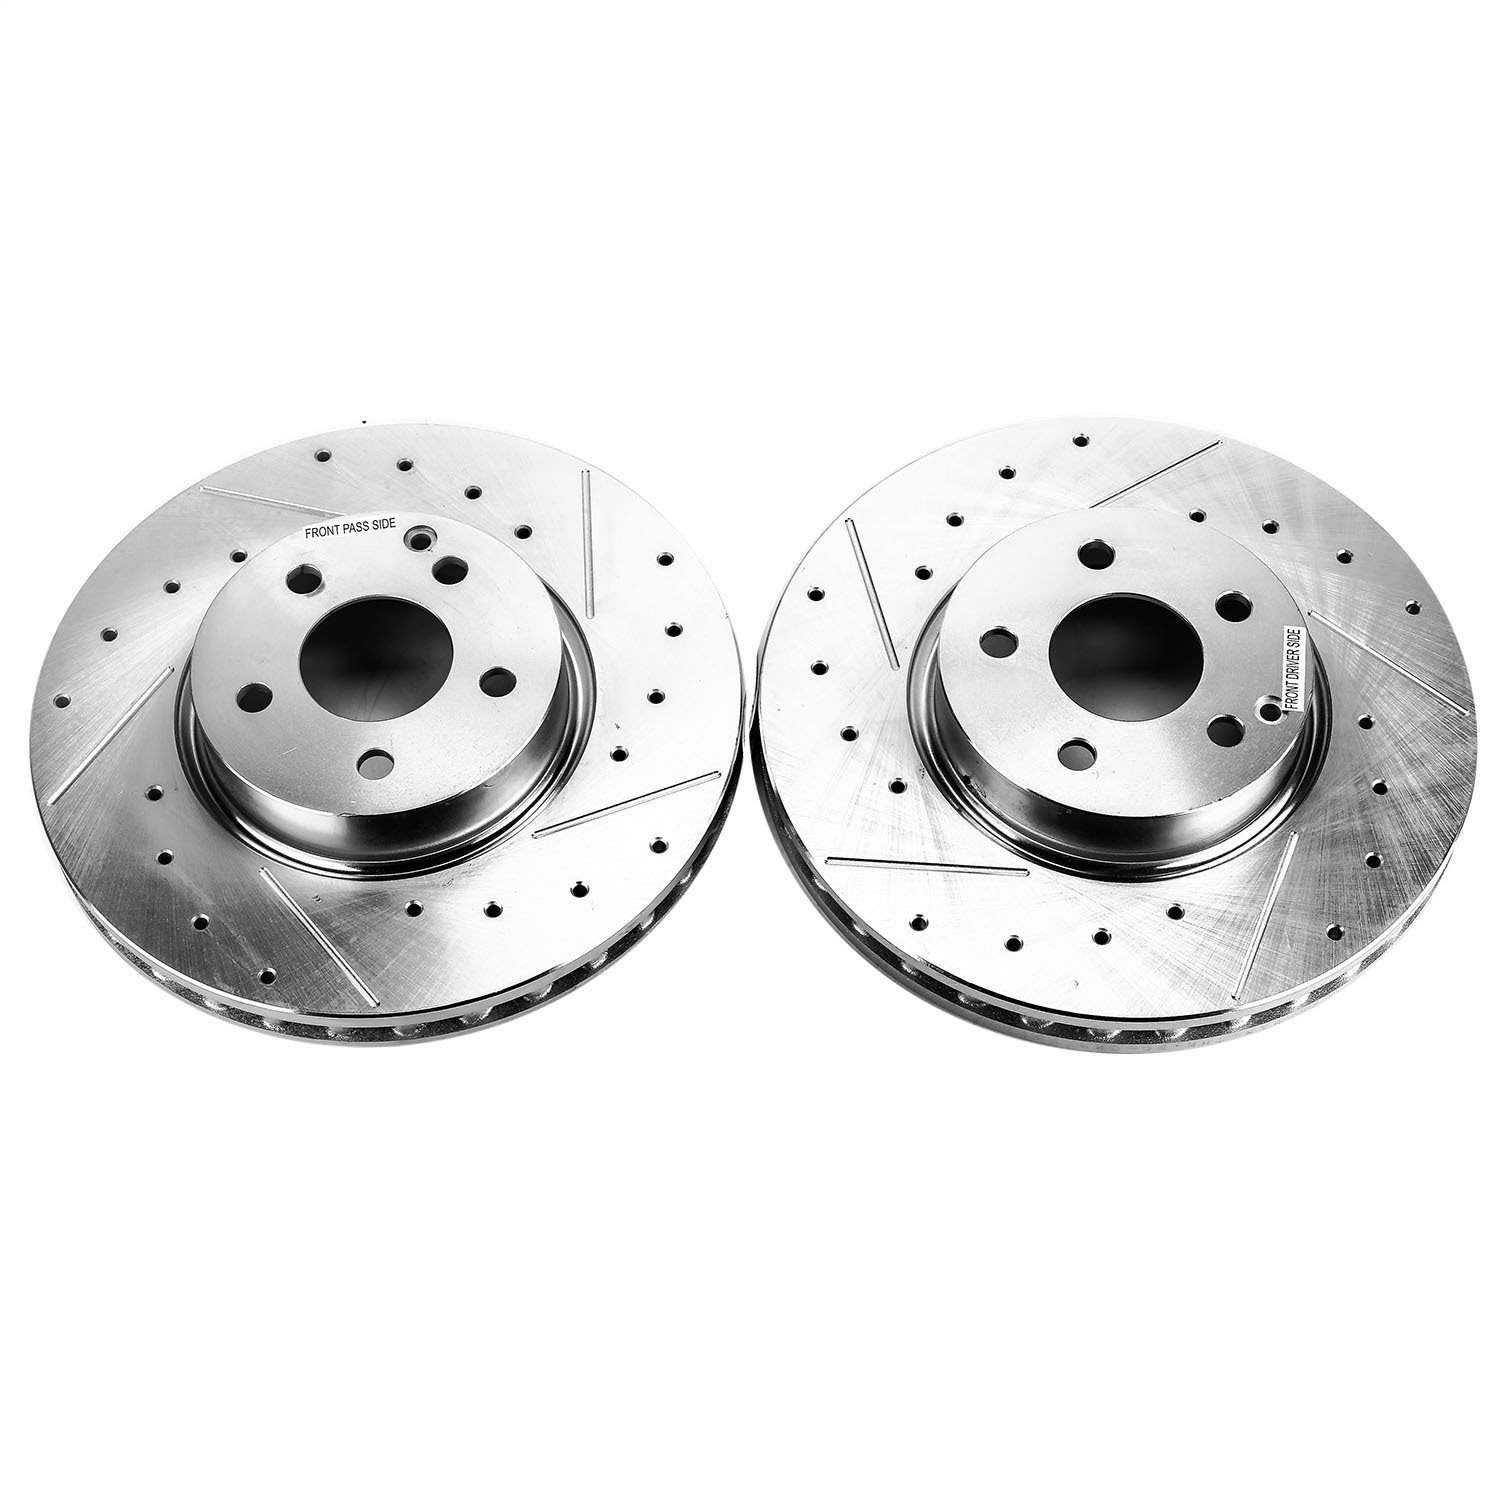 Drilled And Slotted Front Brake Rotors Fits Select Late Model Audi Models